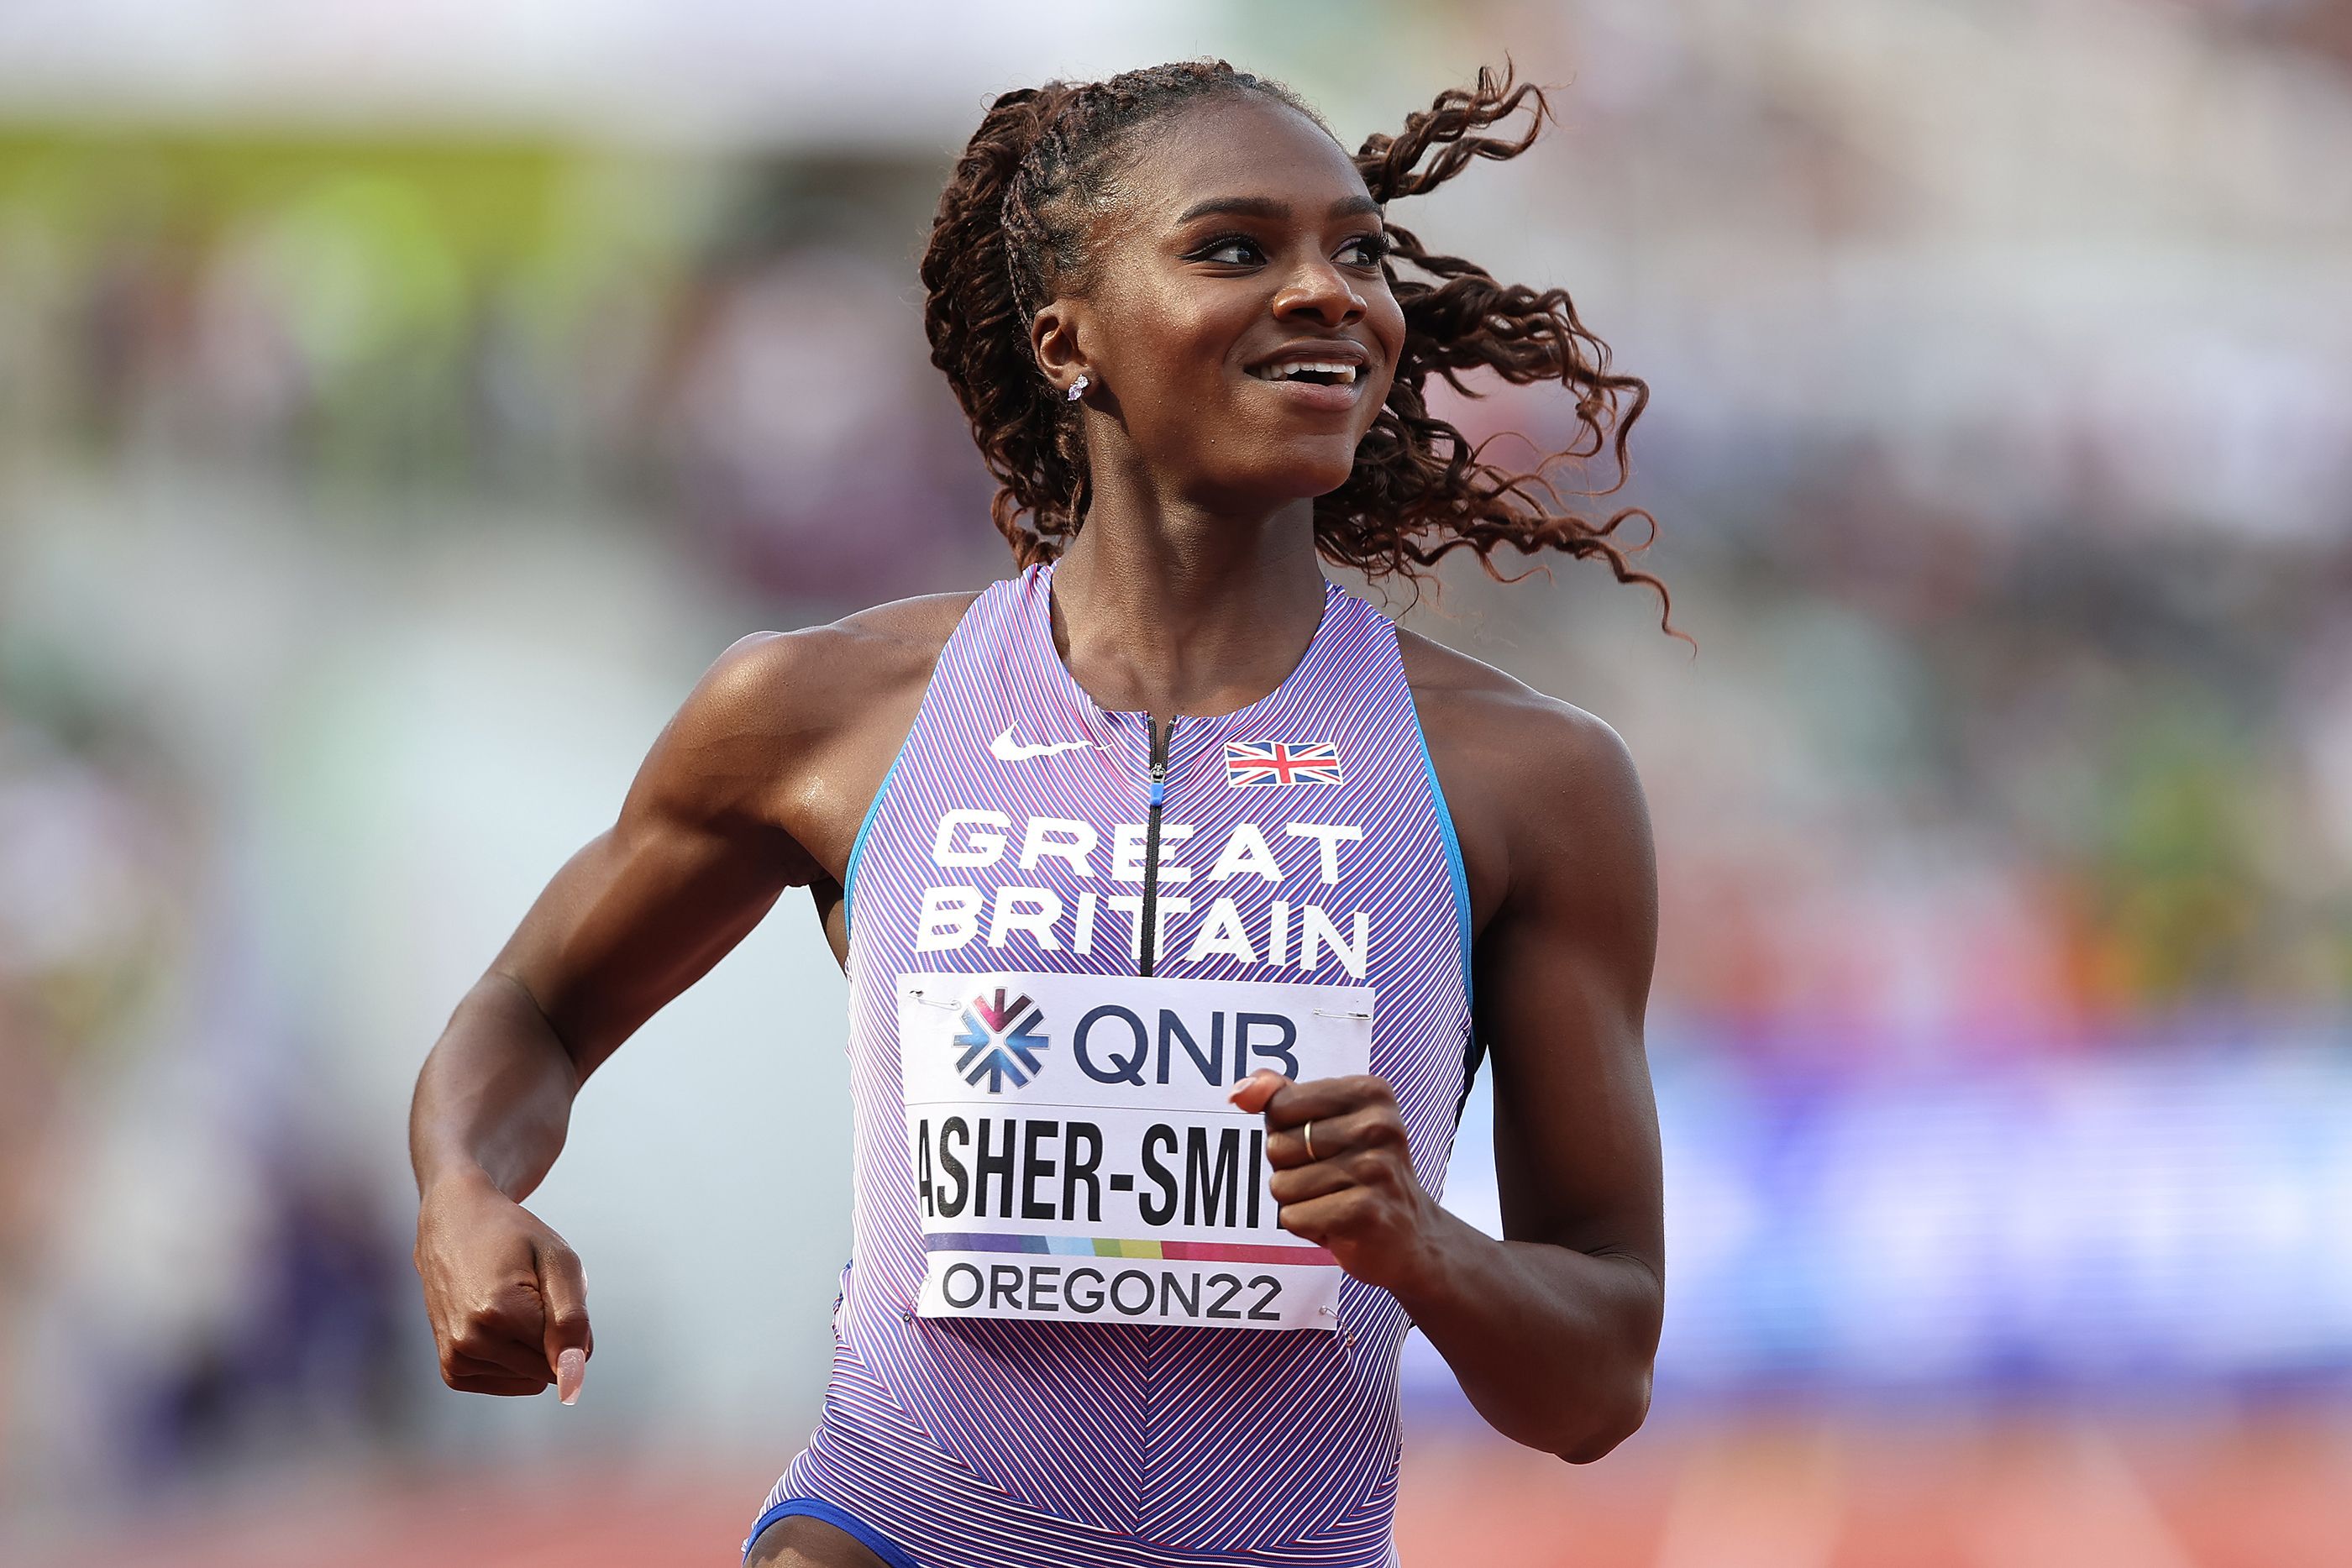 Dina Asher-Smith reacts to her 100m heat performance at the World Athletics Championships Oregon22